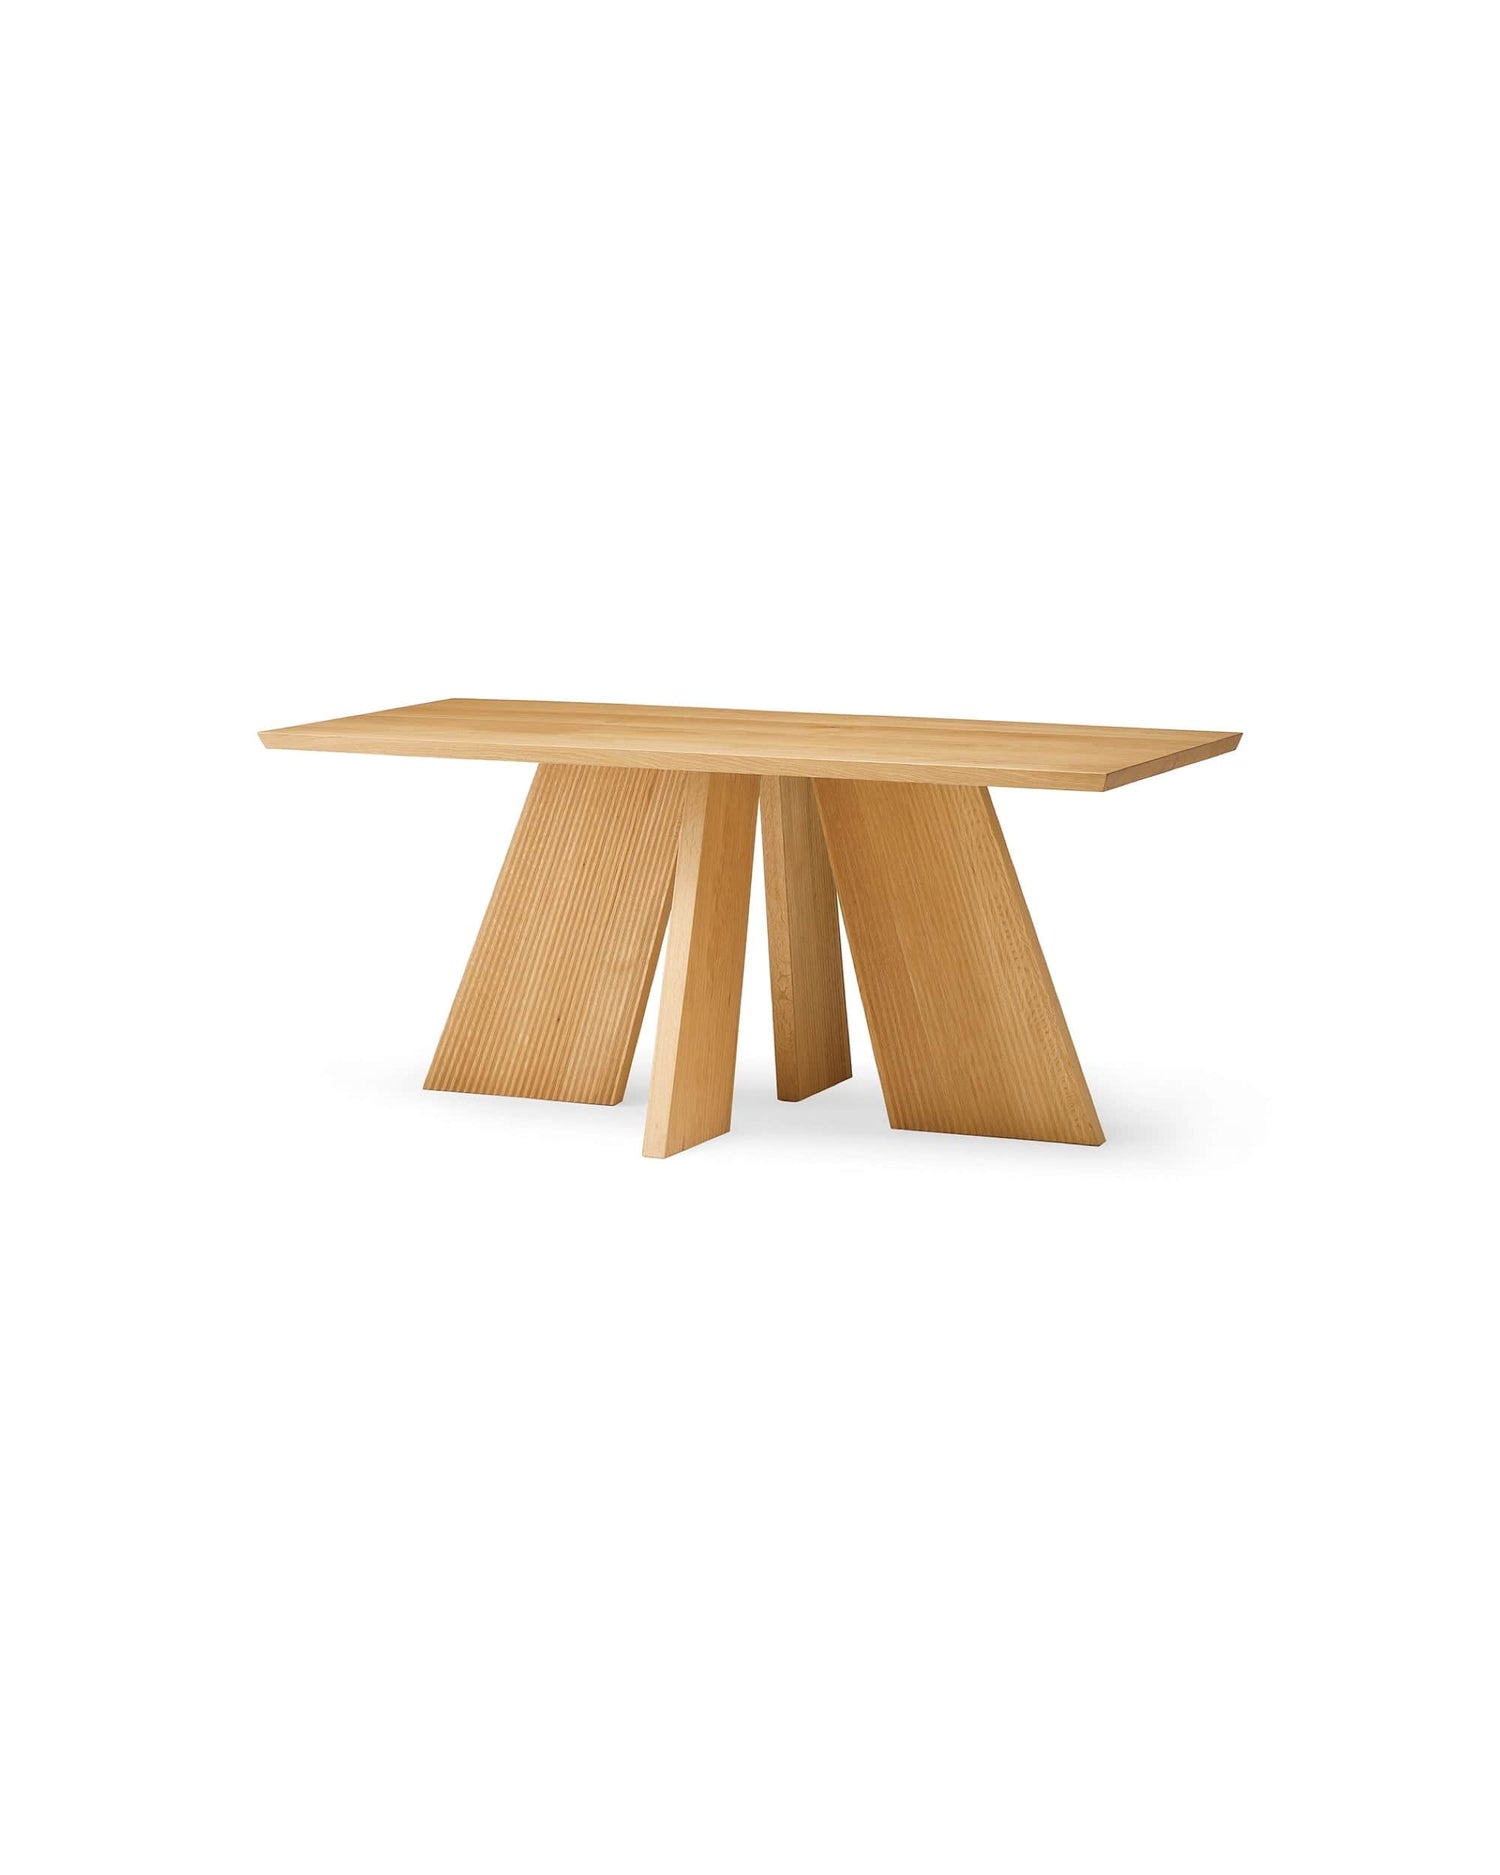 HAKAMA Table by CondeHouse